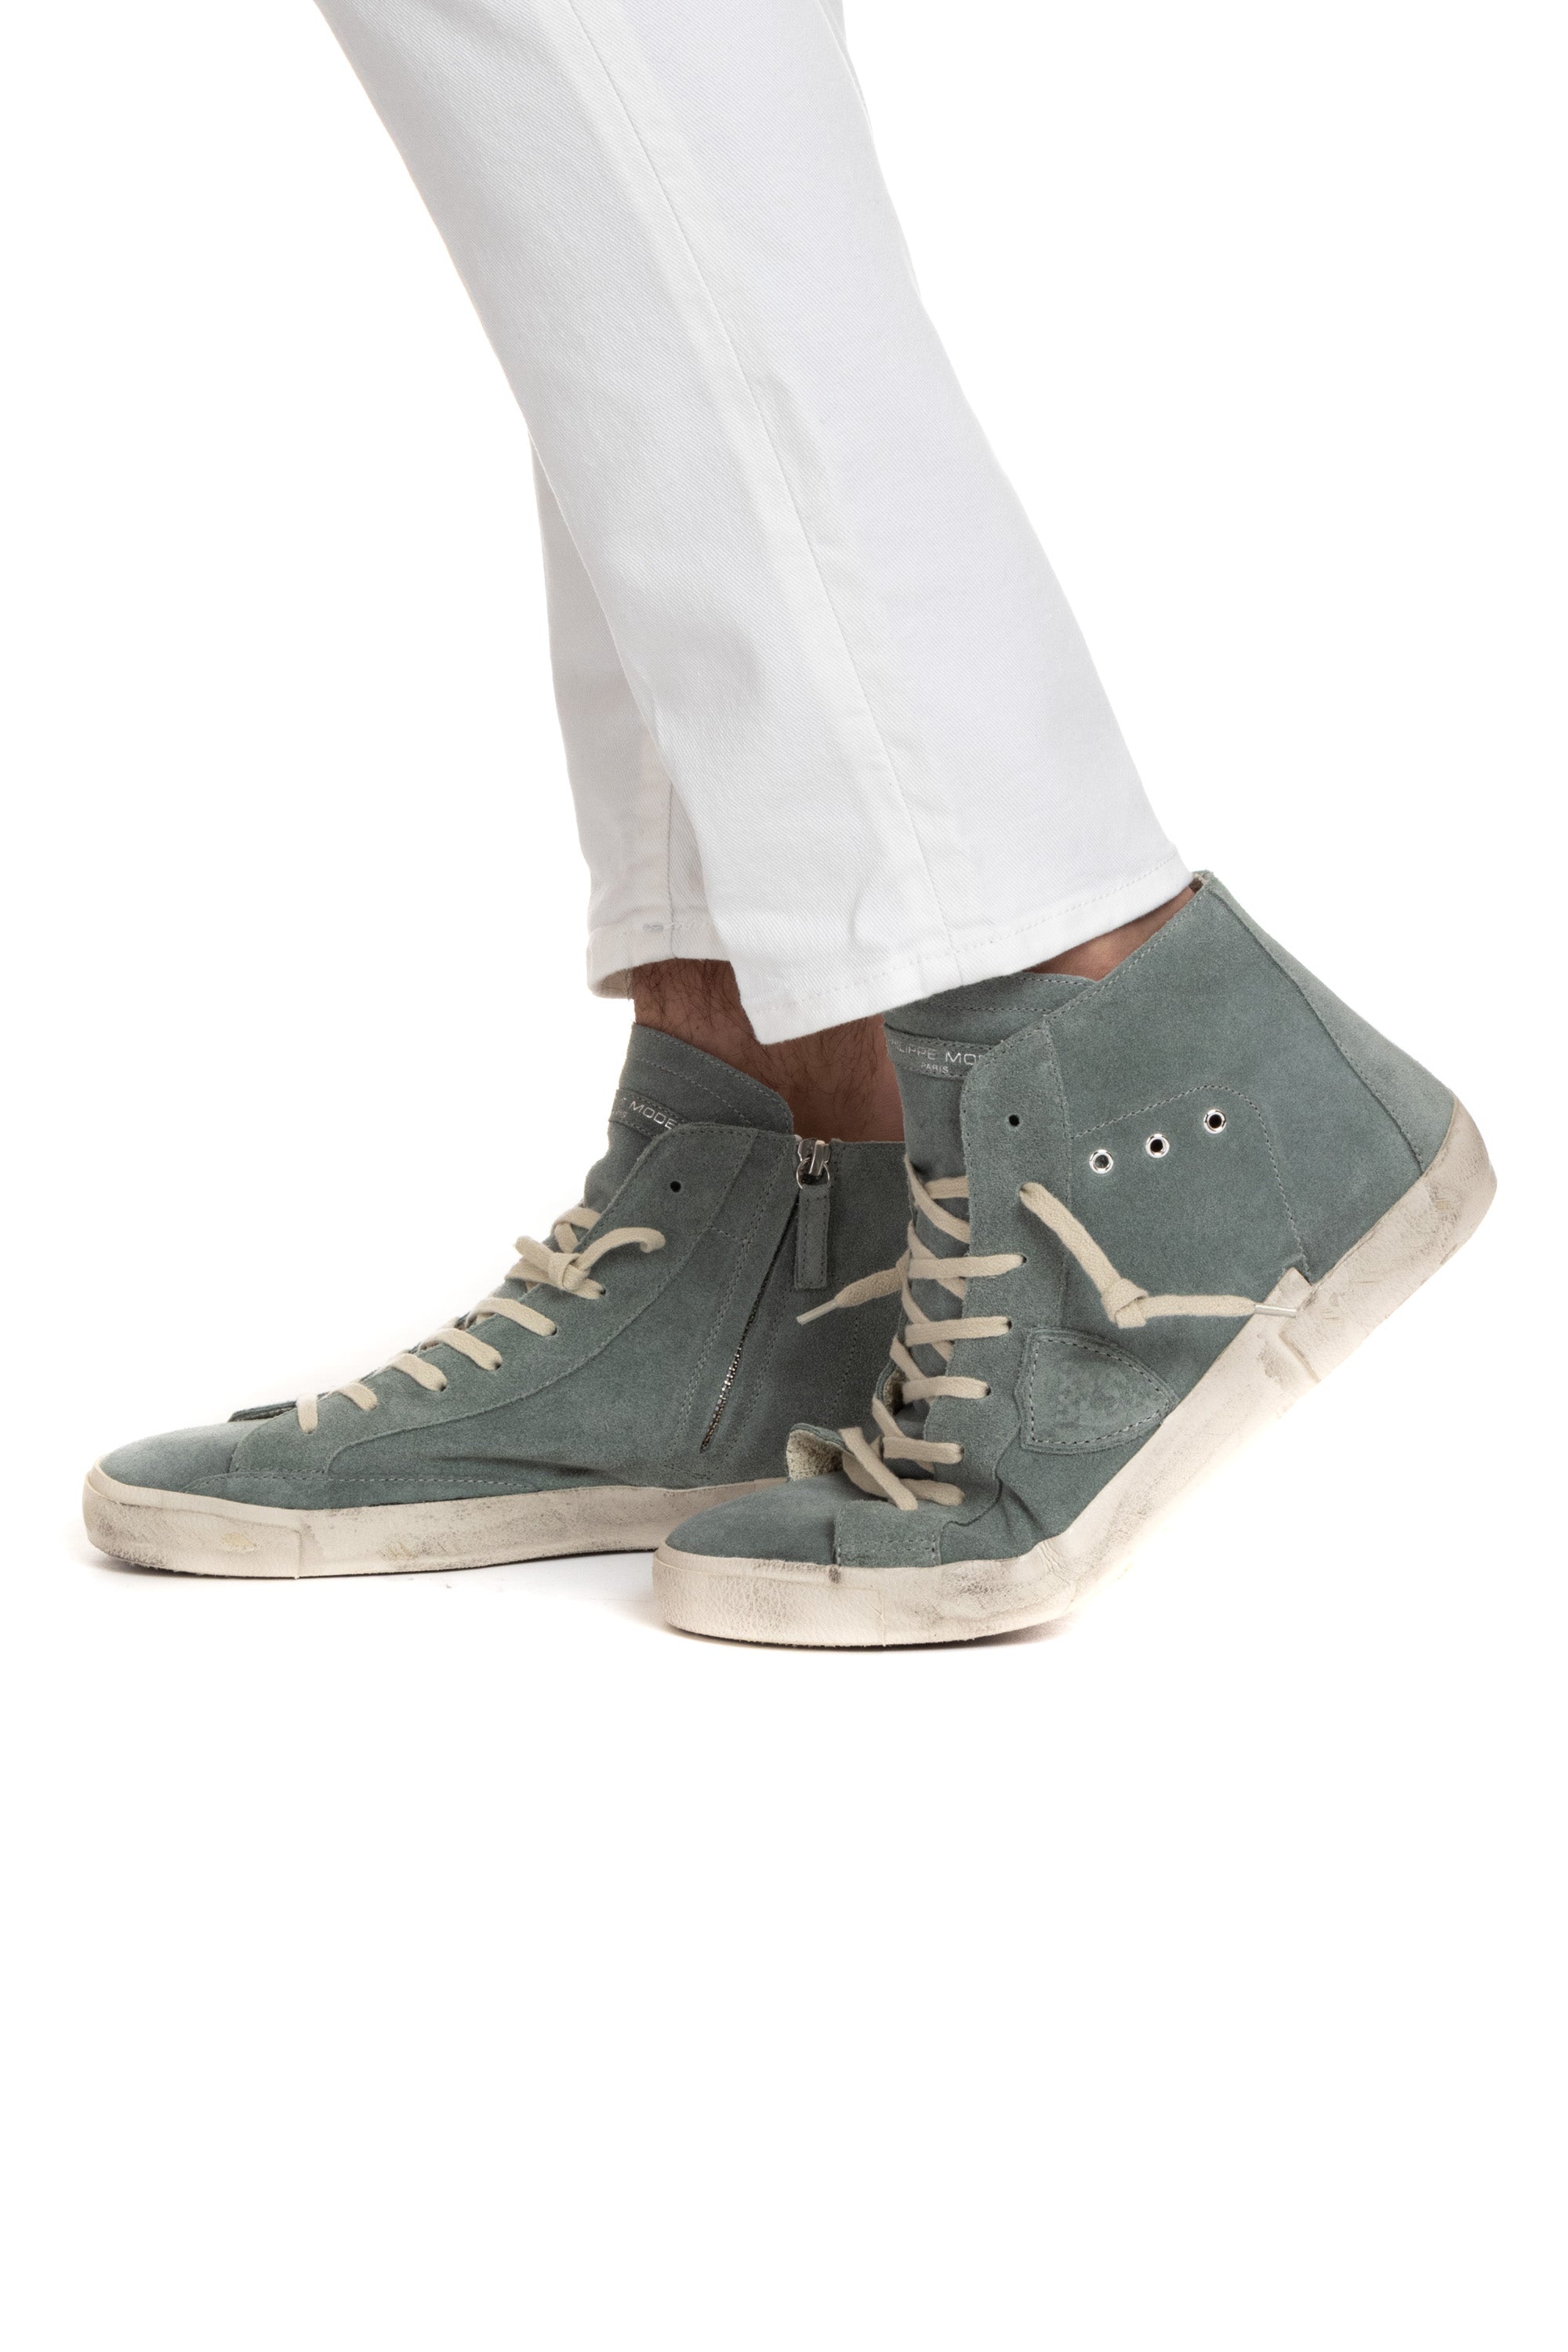 High top leather sneaker with blue heel tab mod. Paris